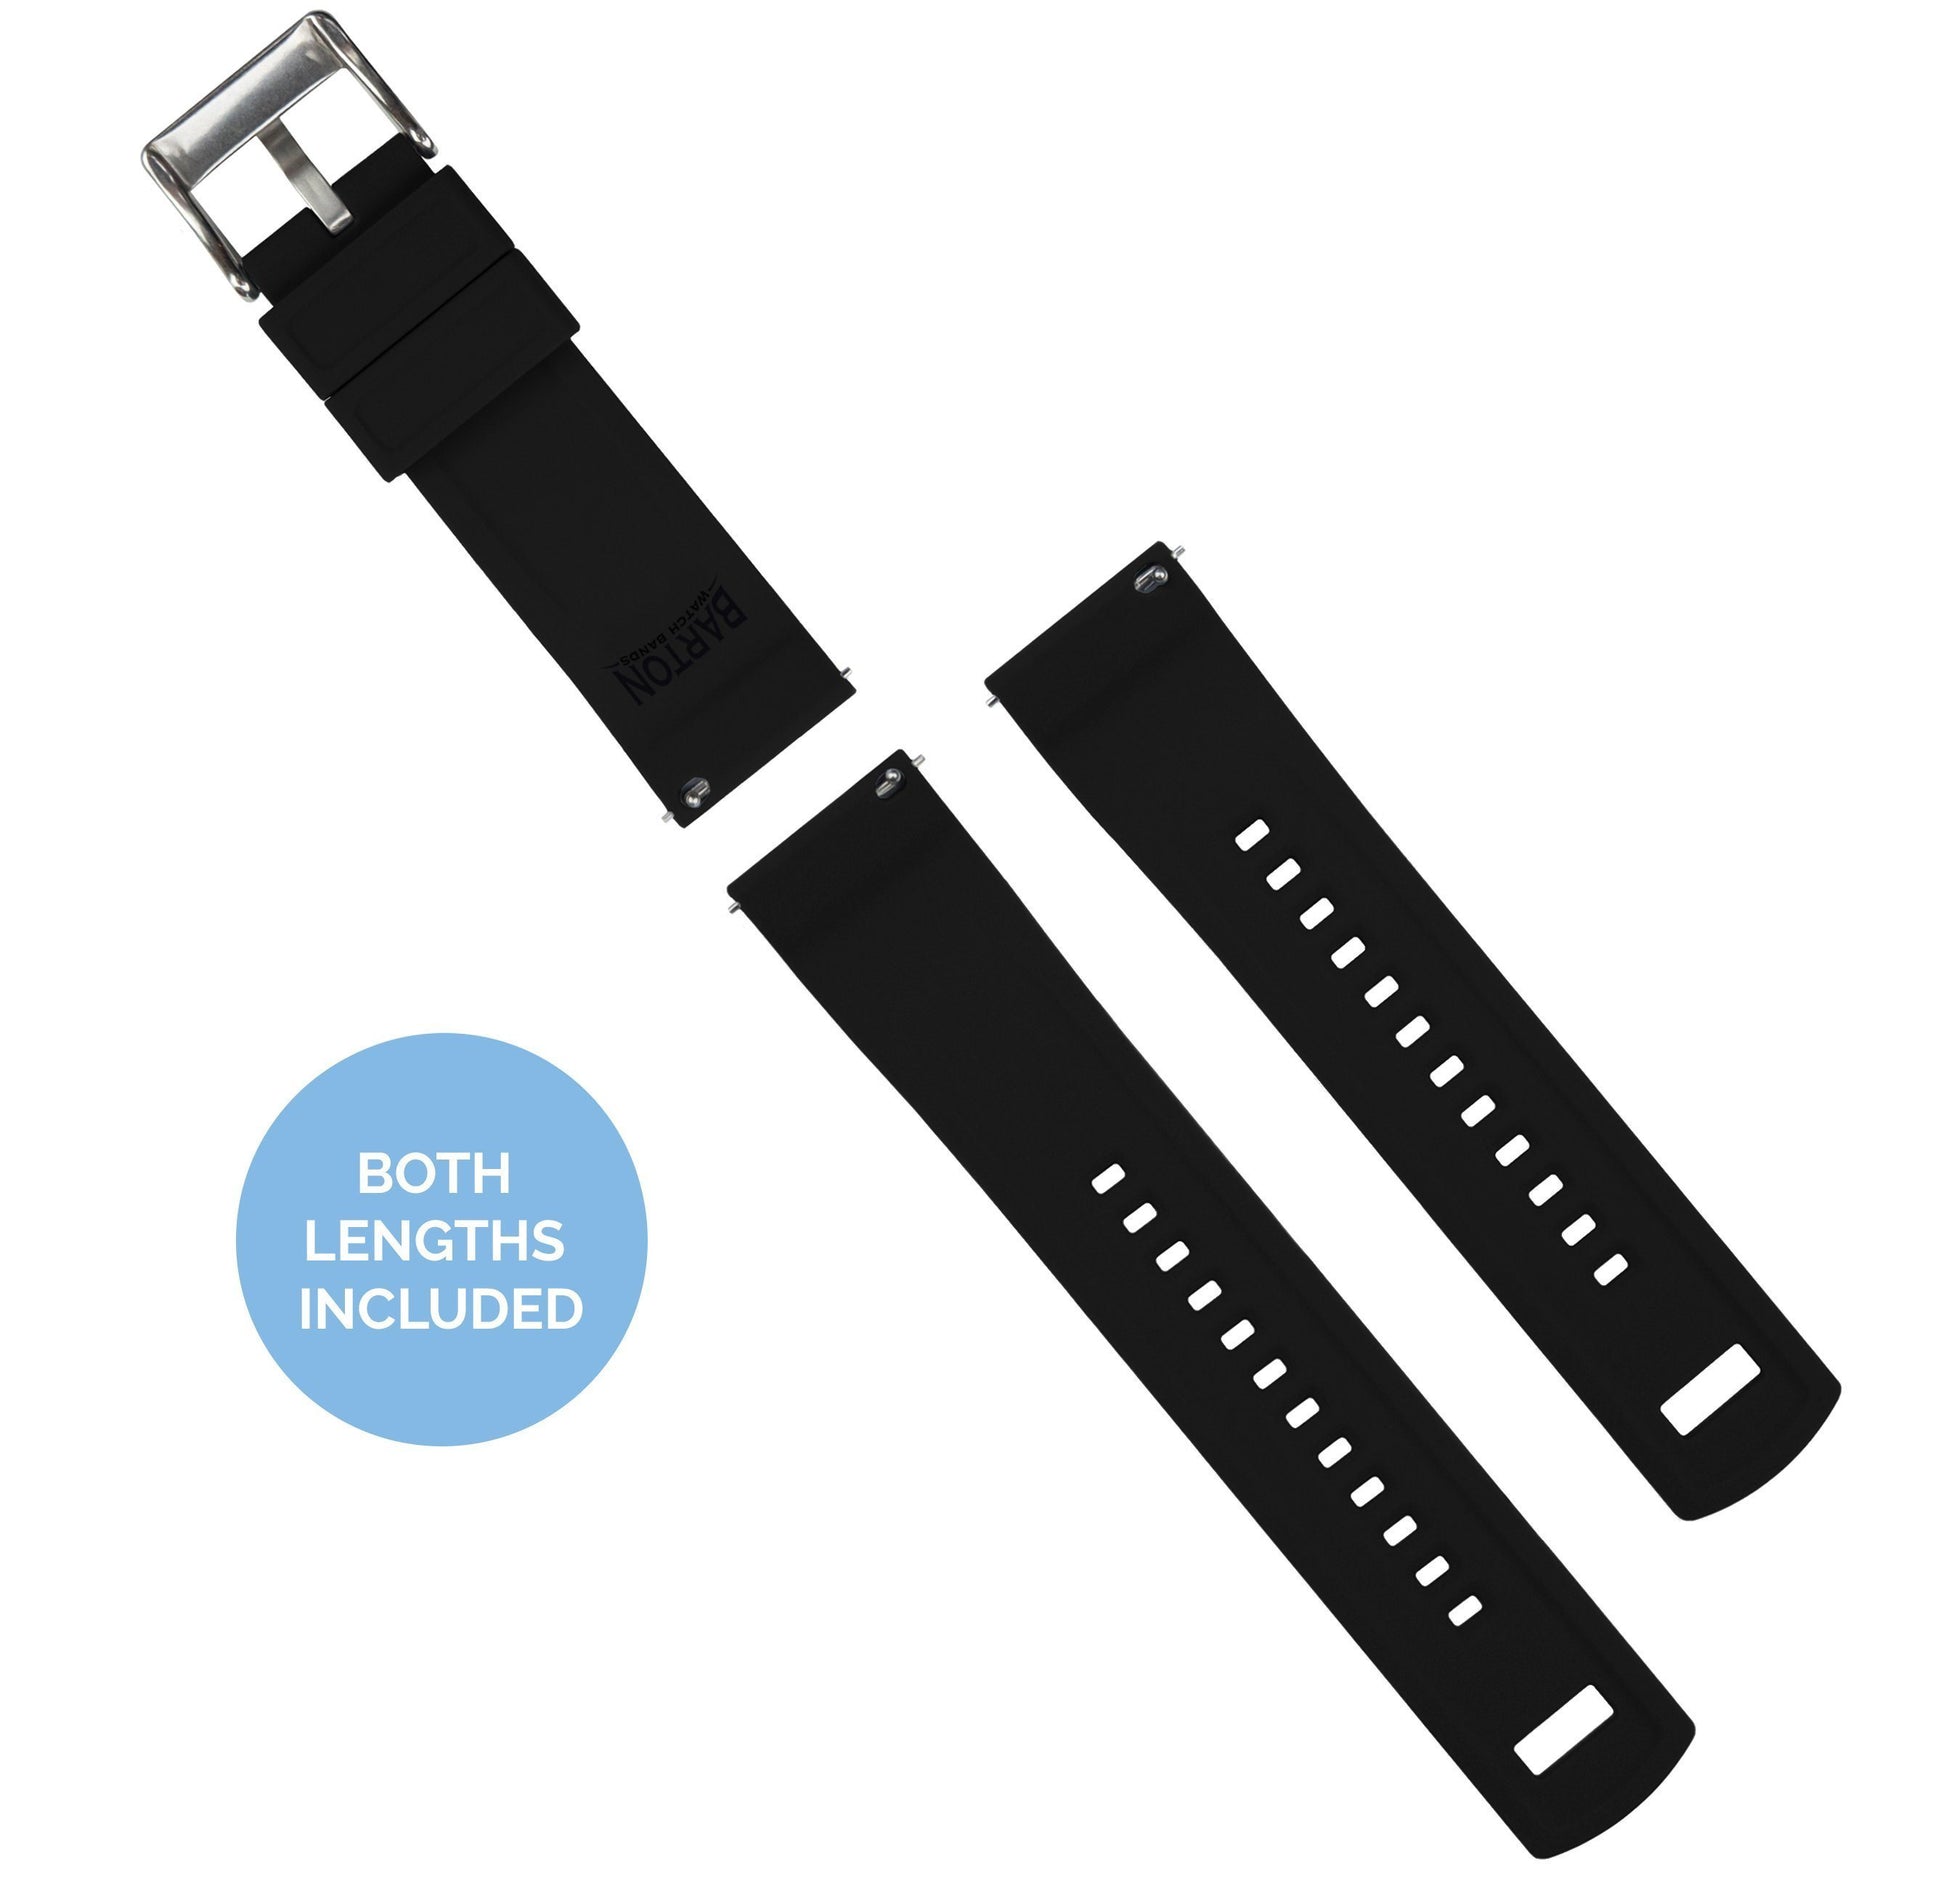 Withings Nokia Activité and Steel HR | Elite Silicone | Cool Grey Top / Black Bottom - Barton Watch Bands